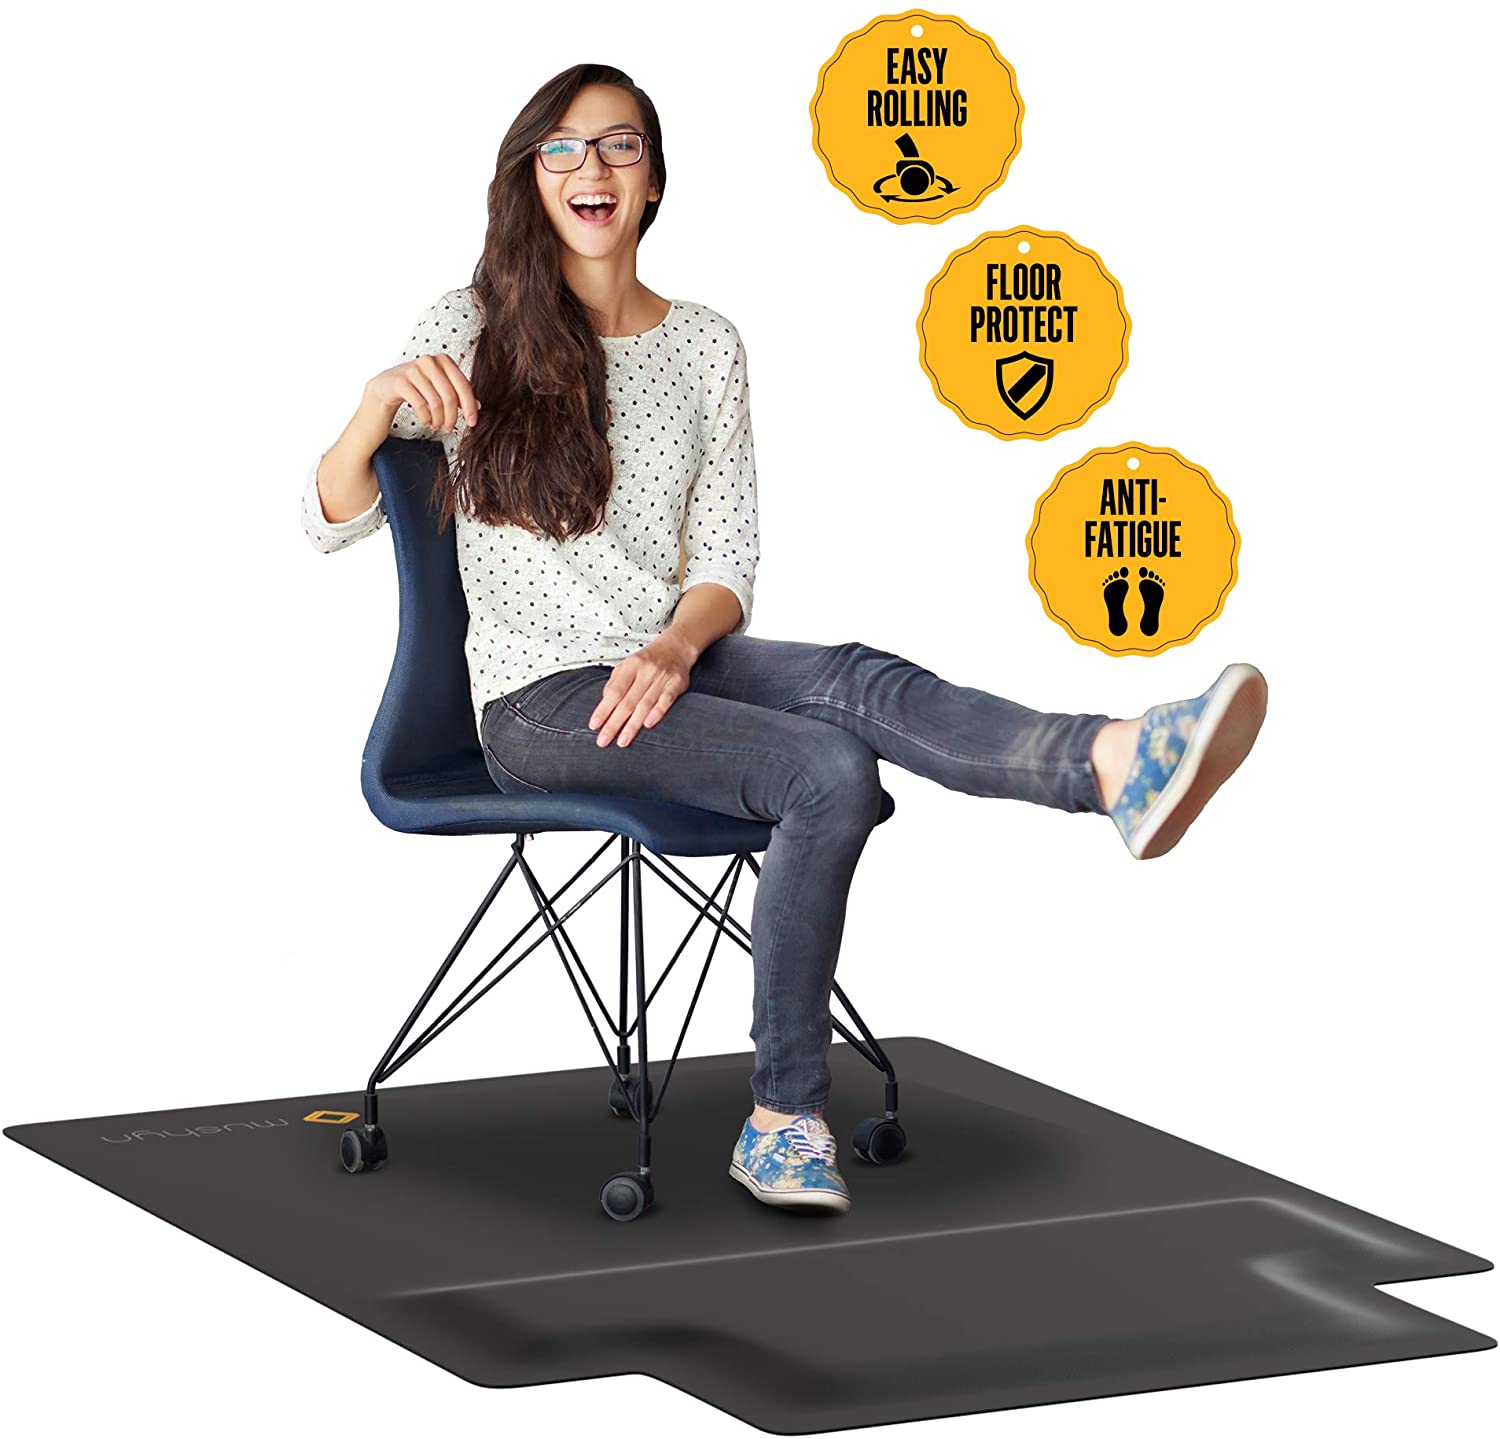 Office Chair Mat with Anti Fatigue Cushioned Foam - Chair Mat for Harwood Floor with Foot Rest Under Desk - 2 in 1 Chairmat Standing Desk Anti-Fatigue Comfort Mat